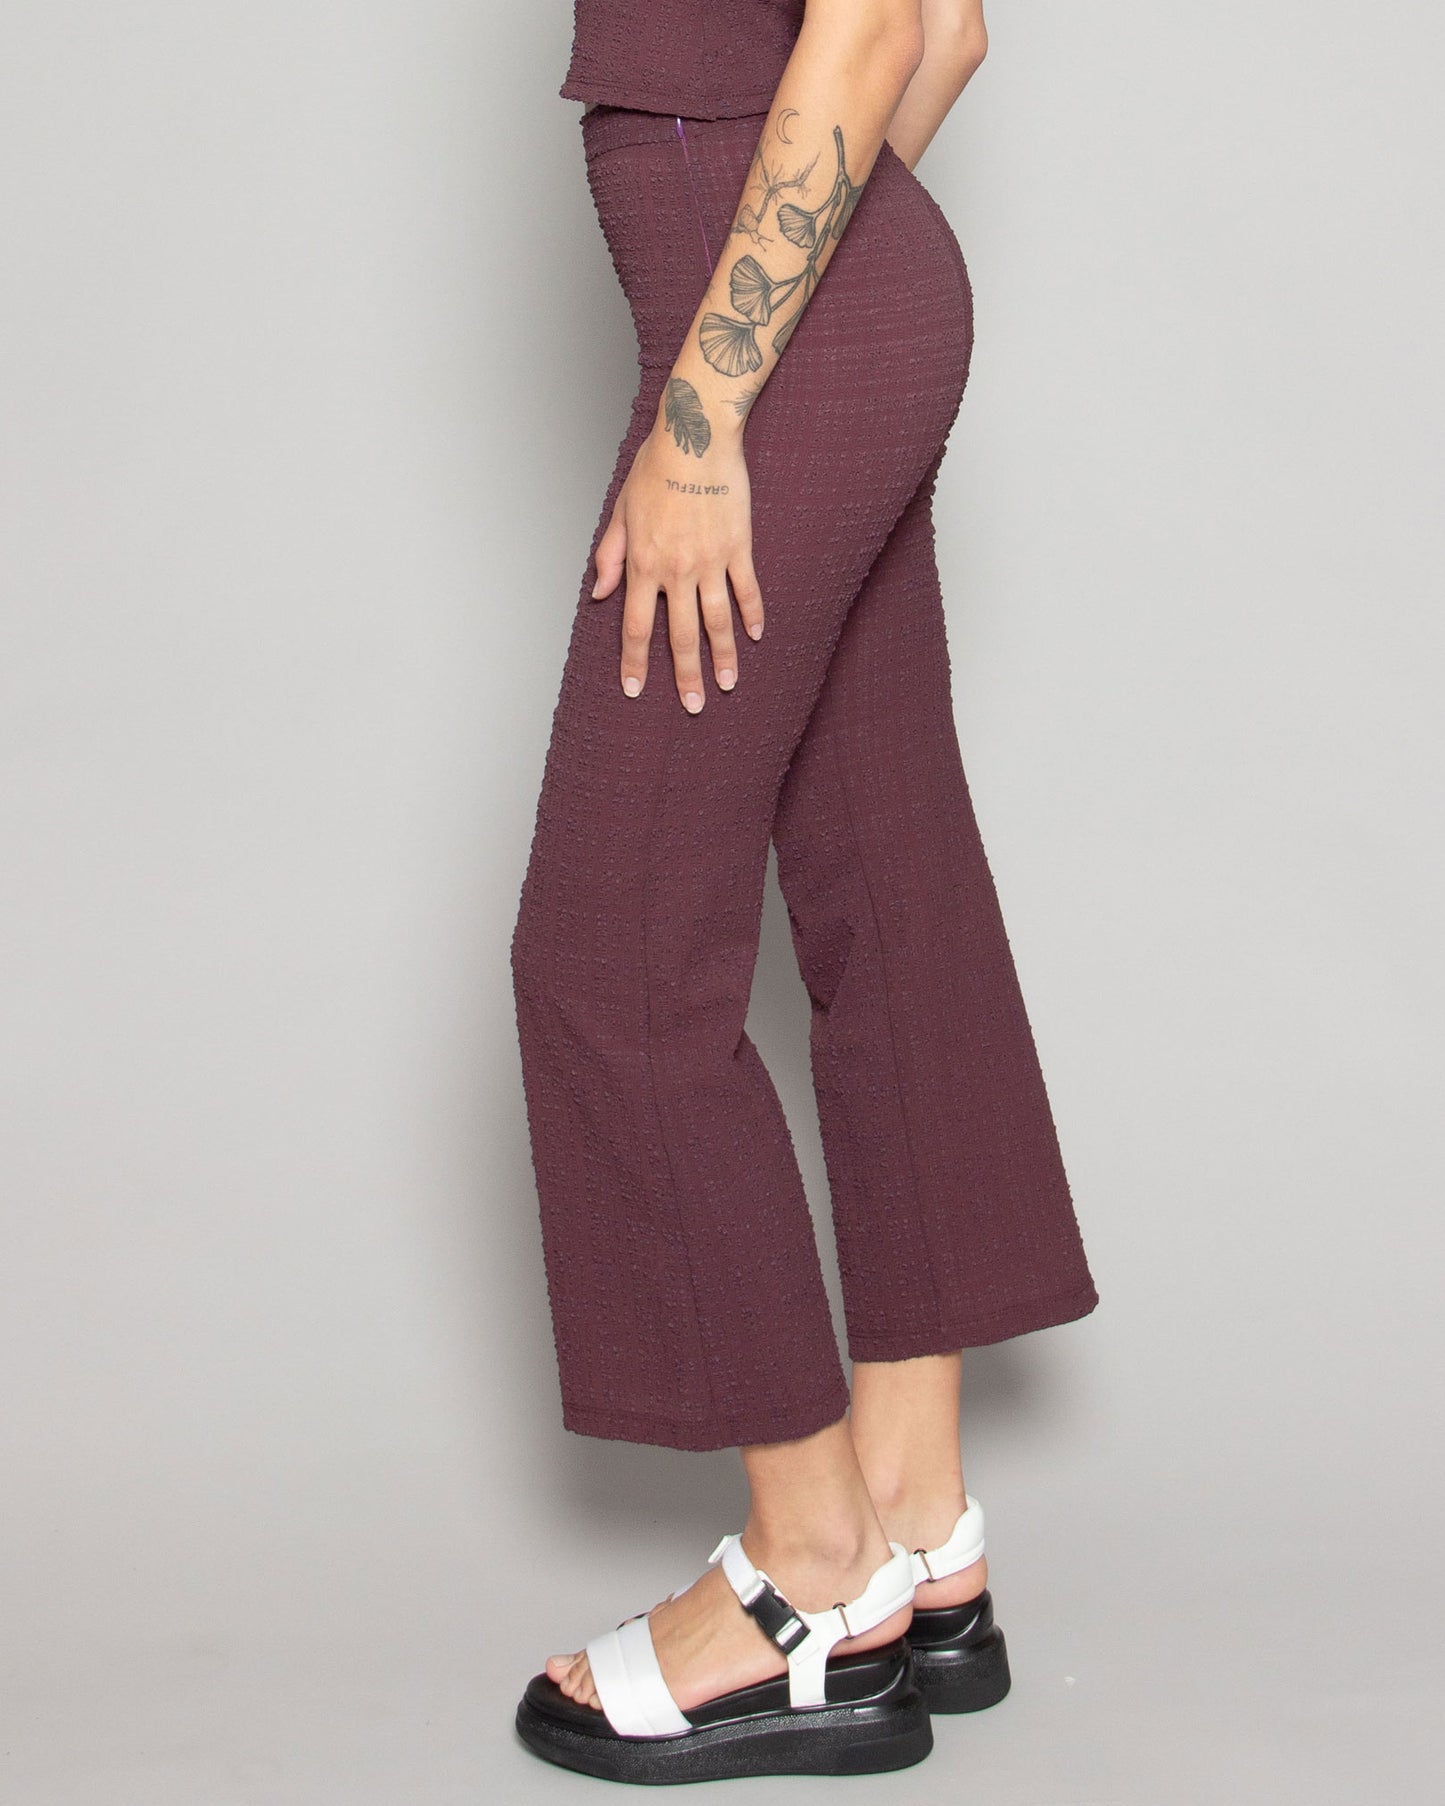 RACHEL COMEY Mando Pant in Maroon Stretchy Check